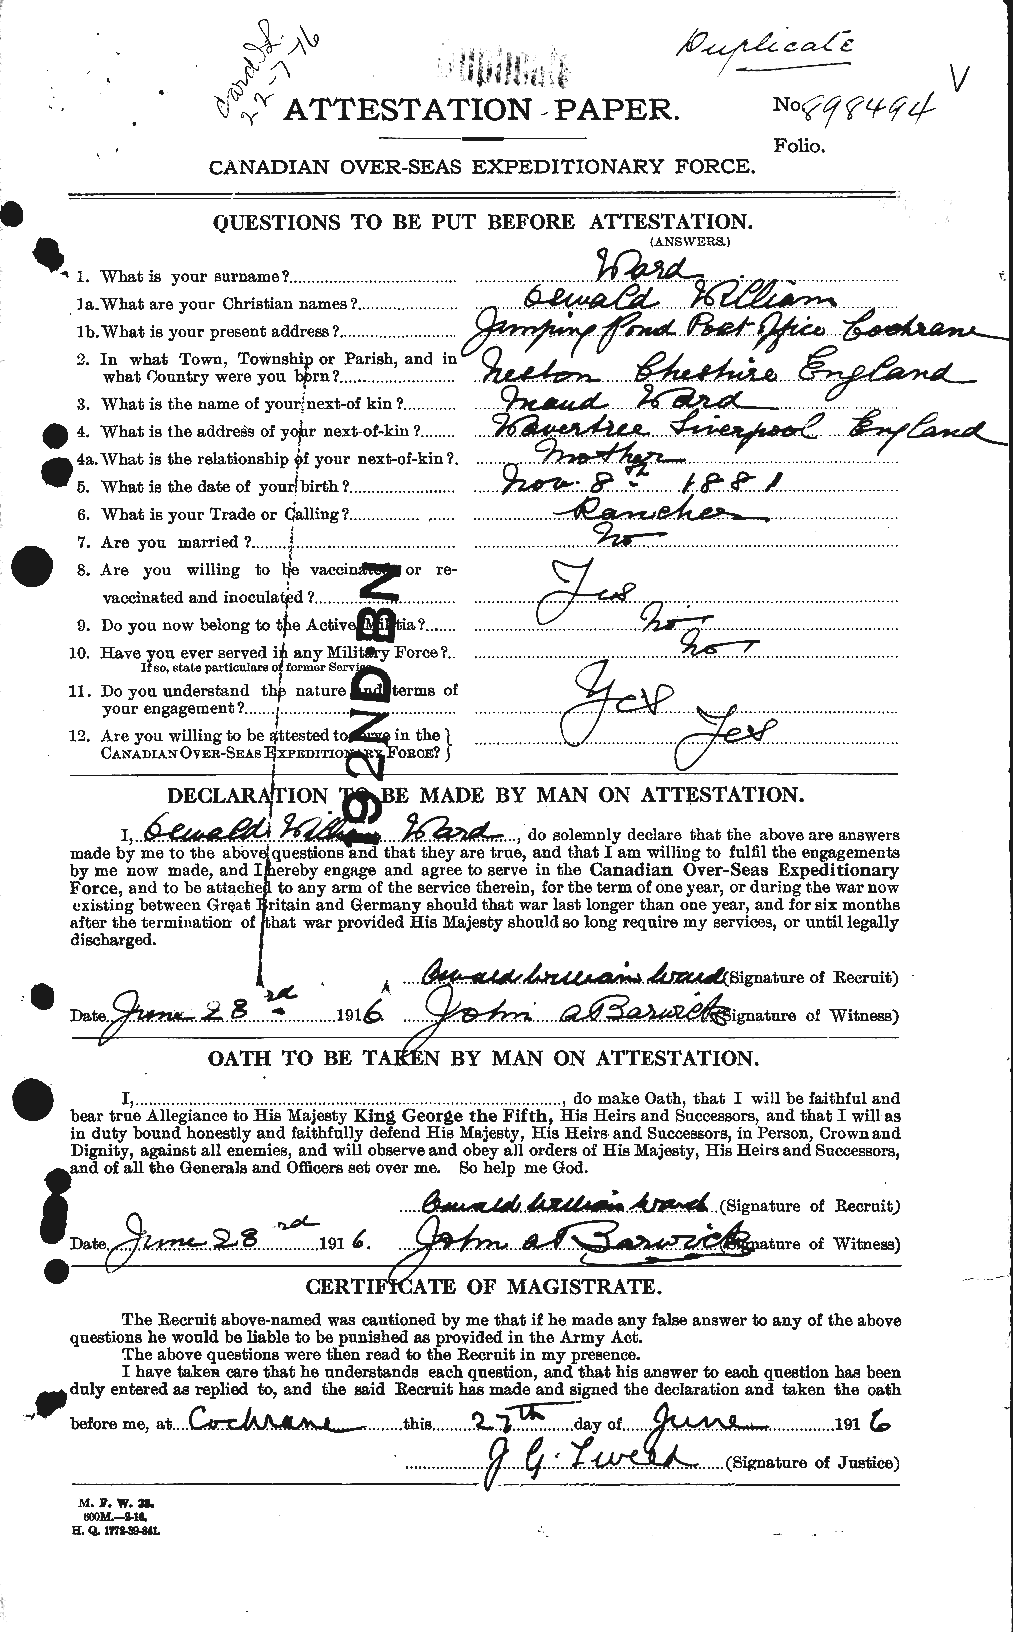 Personnel Records of the First World War - CEF 659616a